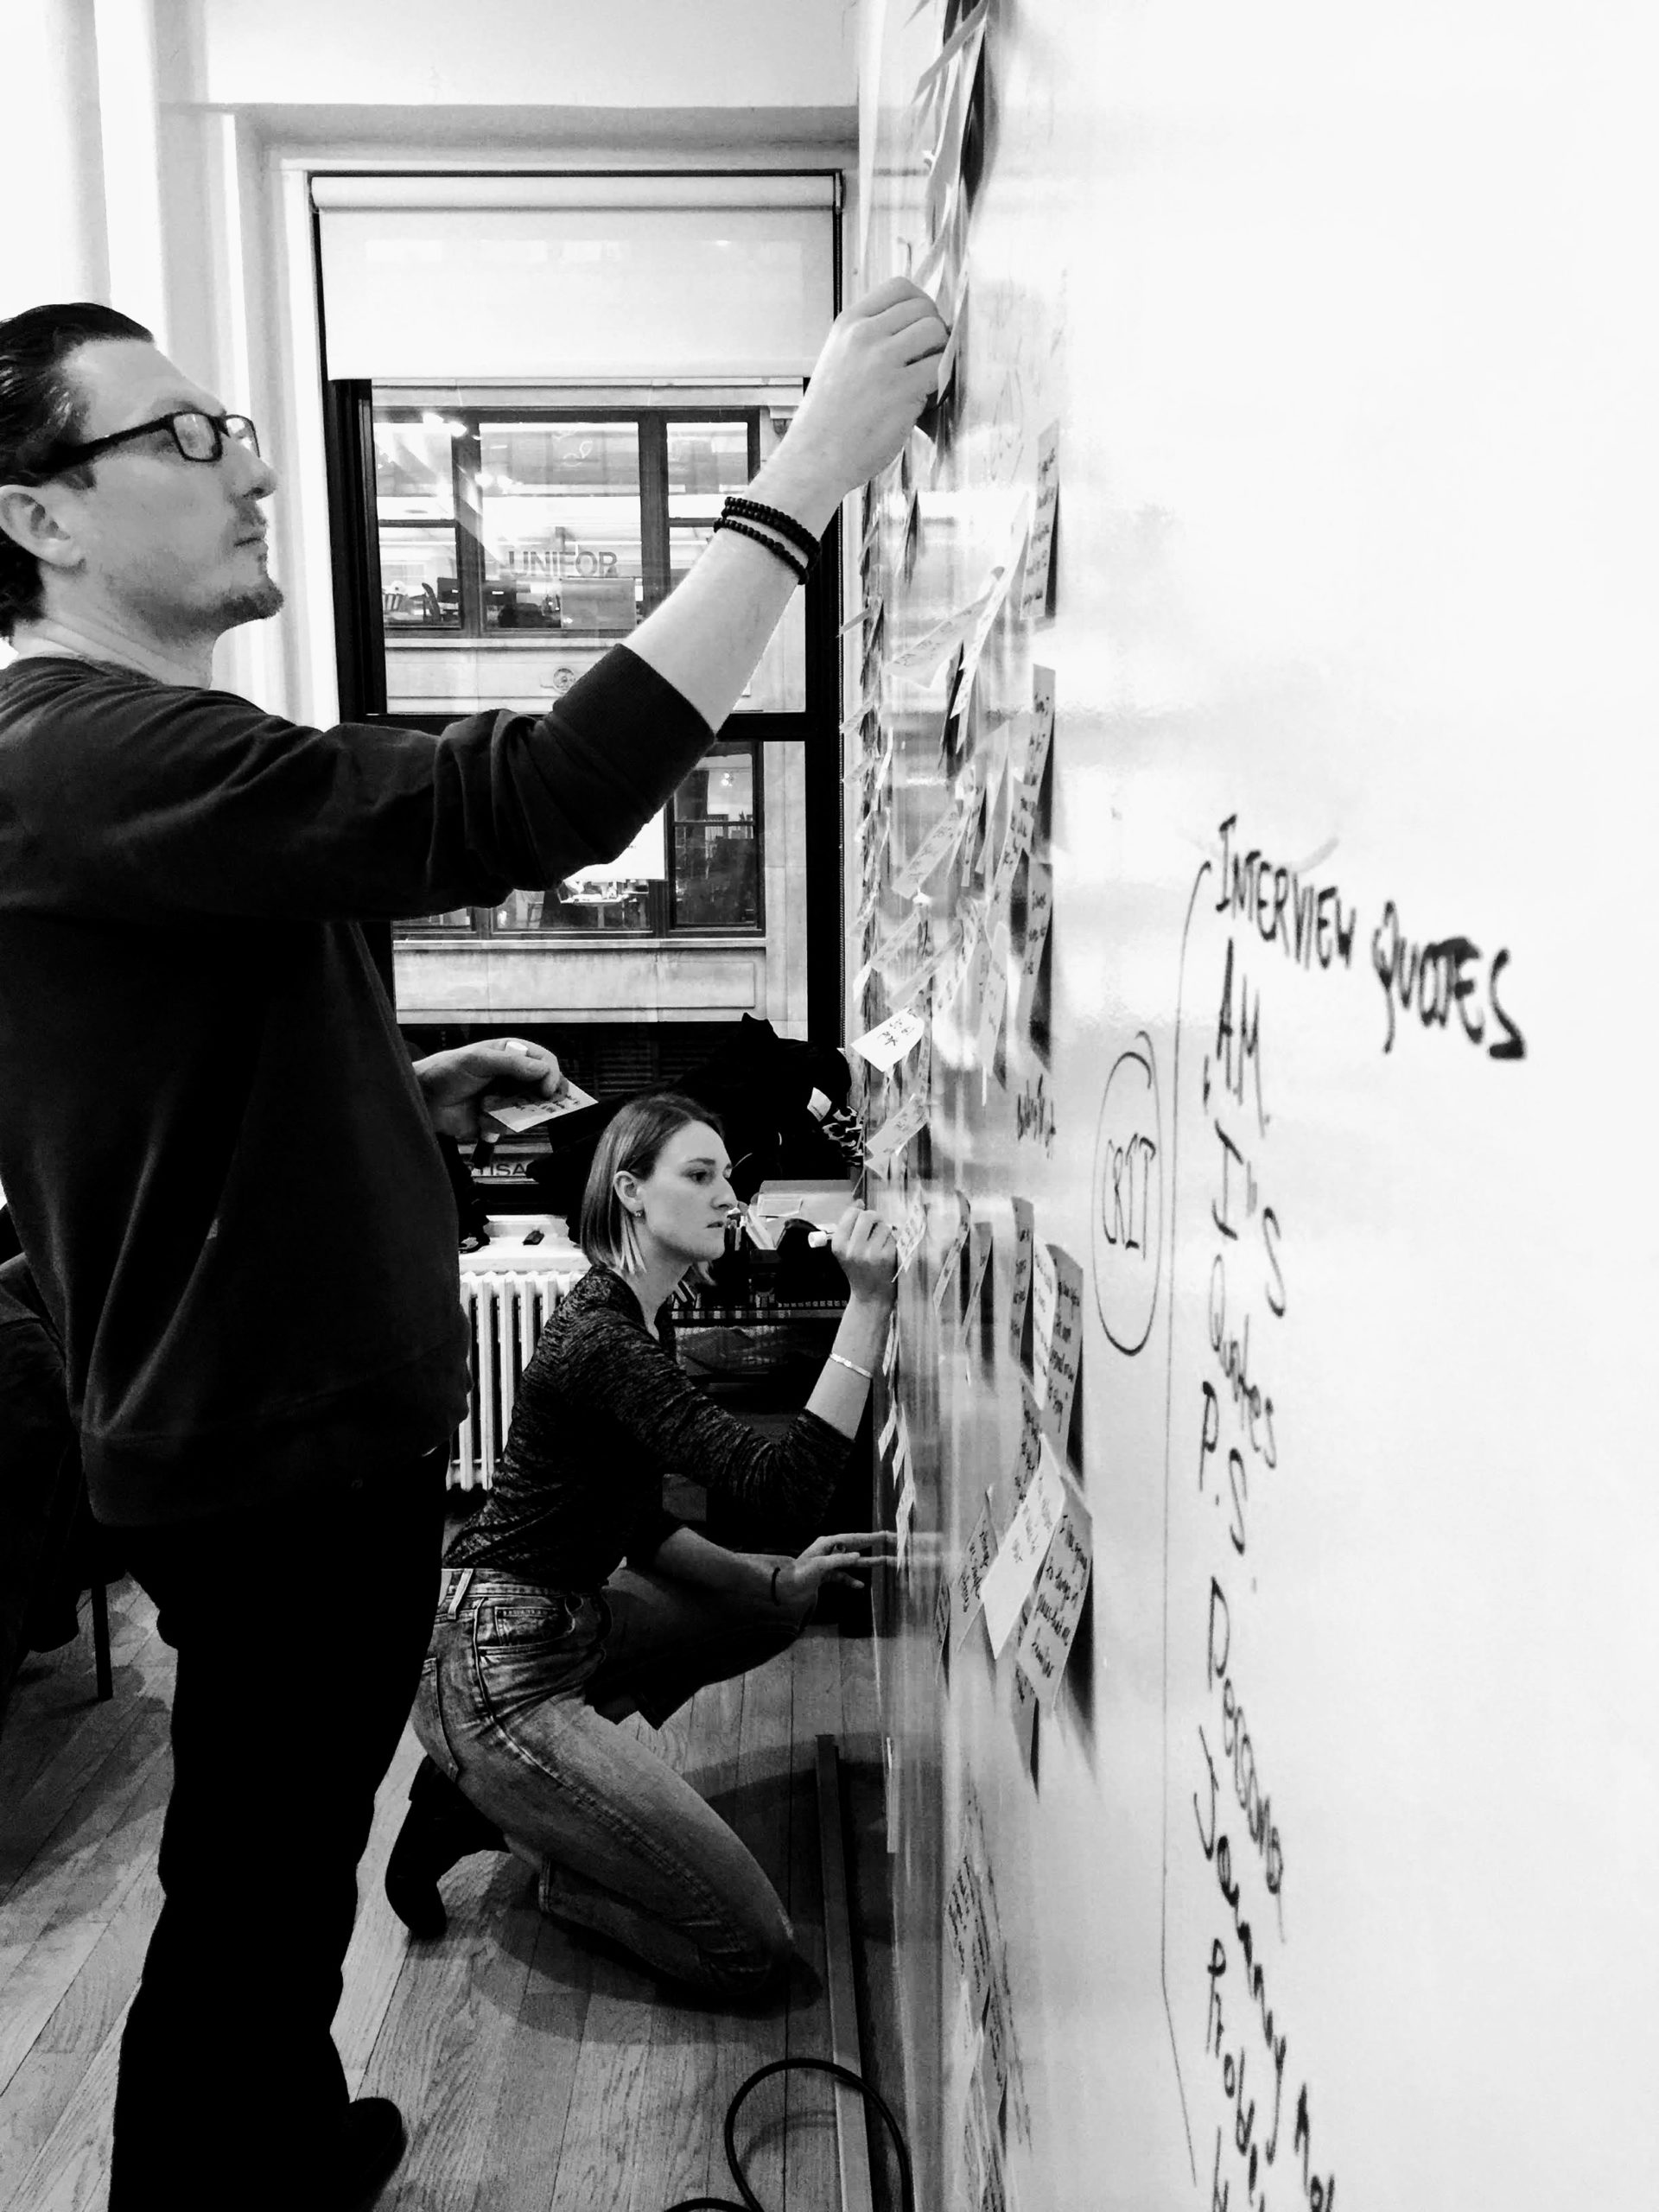 Black and white photo of 2 people affinity mapping, arranging post-it notes on white board.